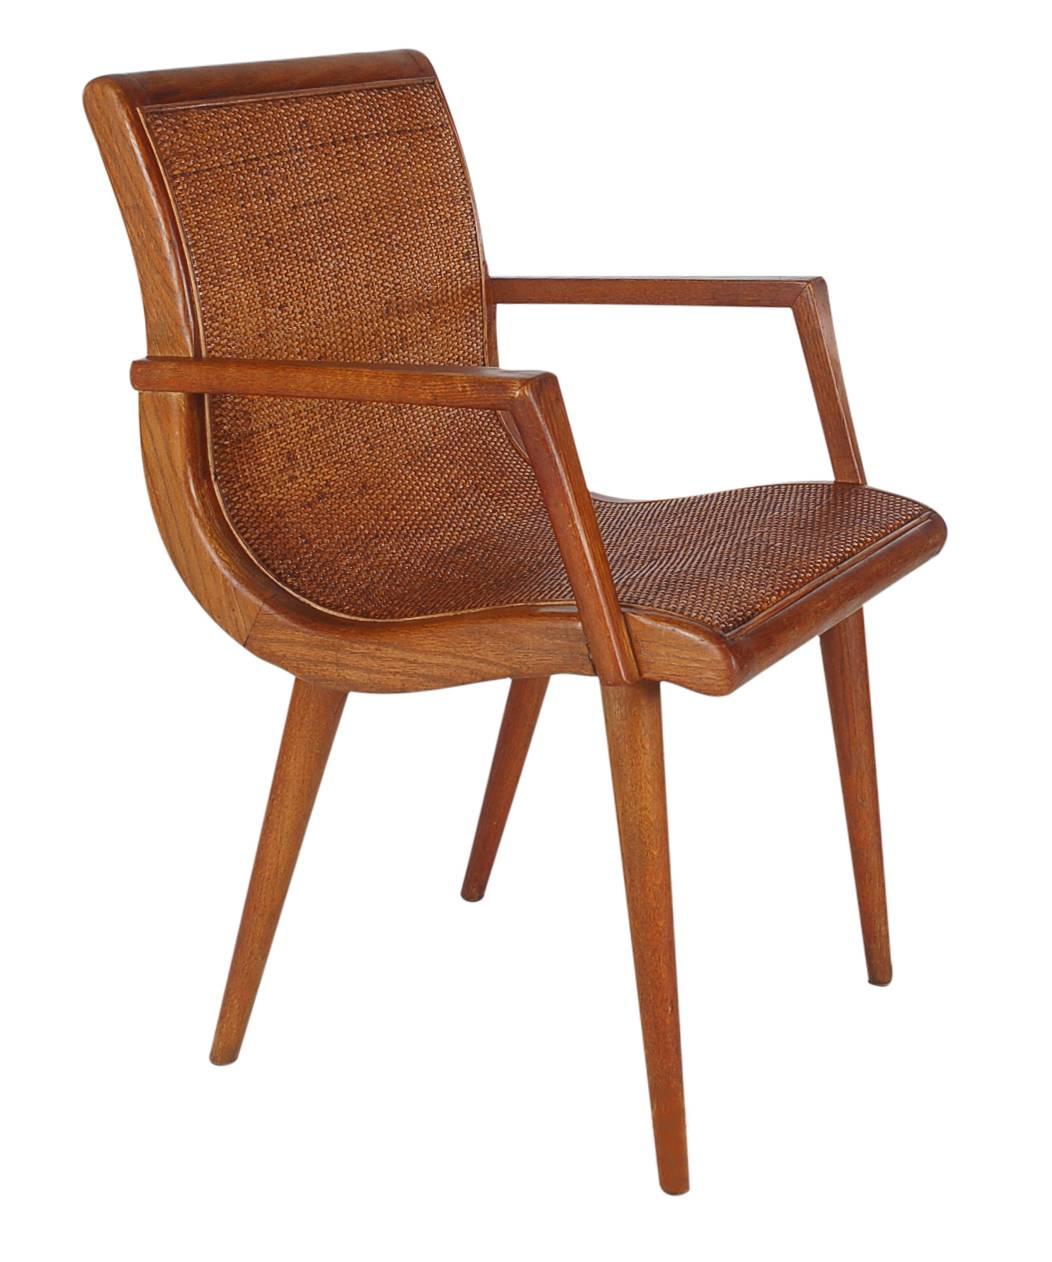 A very handsome pair of matching side chairs from the 1950s. They feature solid oak framing with full cane seat and back rests.